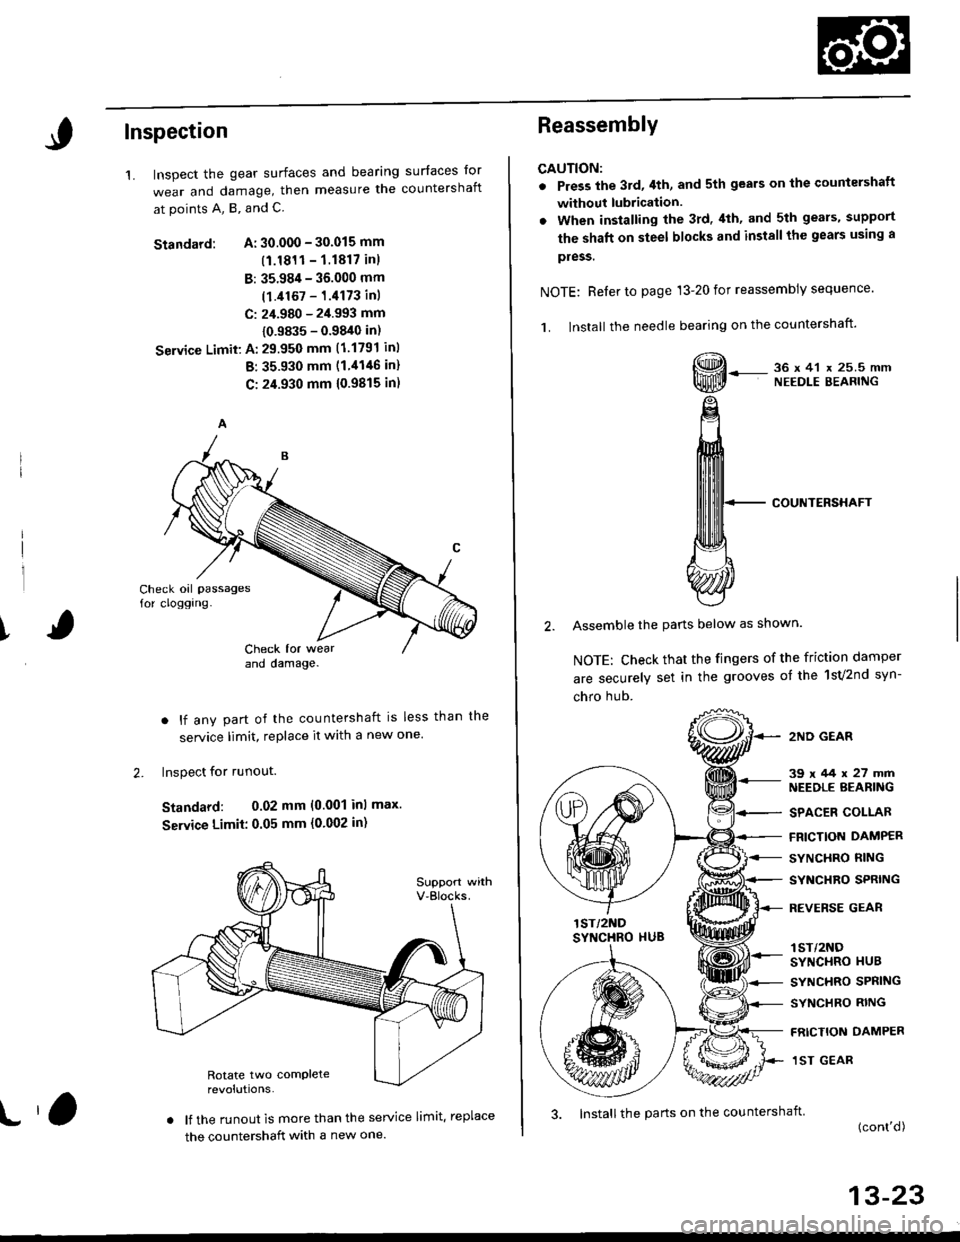 HONDA CIVIC 1996 6.G Owners Manual Inspection
1.surfaces lor
countershaftInspect the gear surfaces and bearang
wear and damage, then measure tne
at points A, B, and C.
Standard: A: 30.000 - 30.015 mm
(1.1811- 1.1817 inl
B: 35.984 - 36.